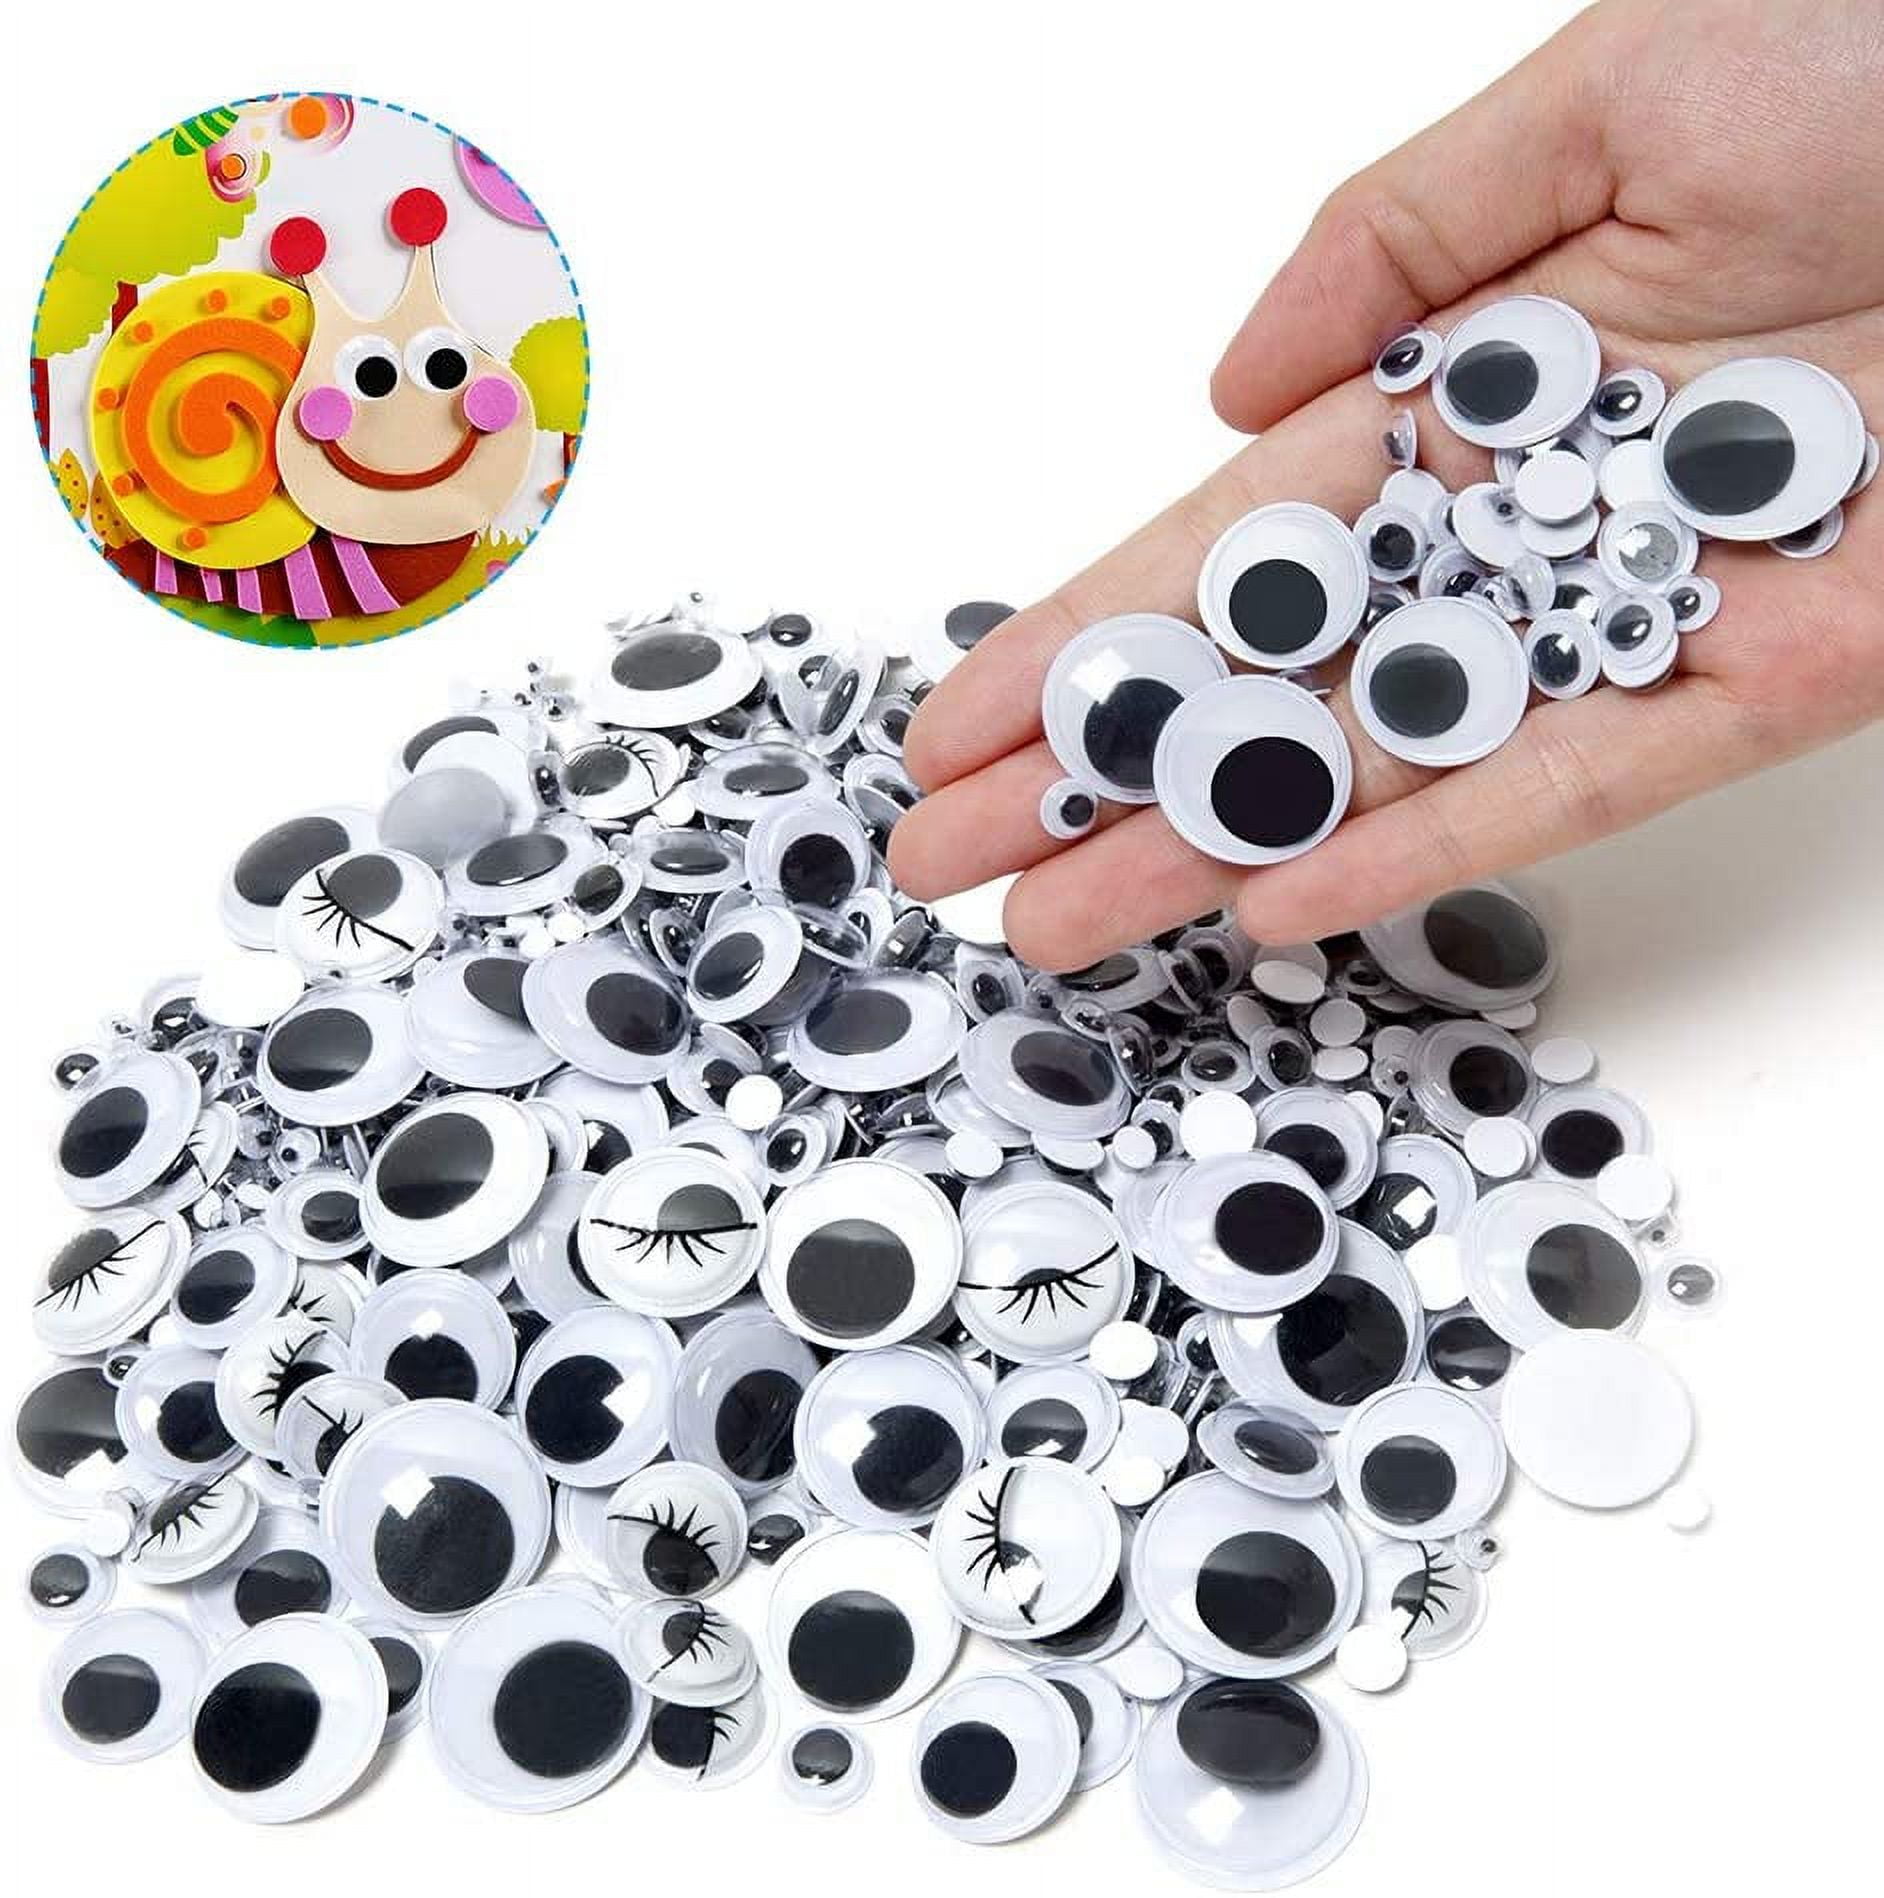 Essentials by Leisure Arts Eyes Sticky Back Moveable 4 2pc Googly Eyes,  Google Eyes for Crafts, Big Googly Eyes for Crafts, Wiggle Eyes, Craft Eyes